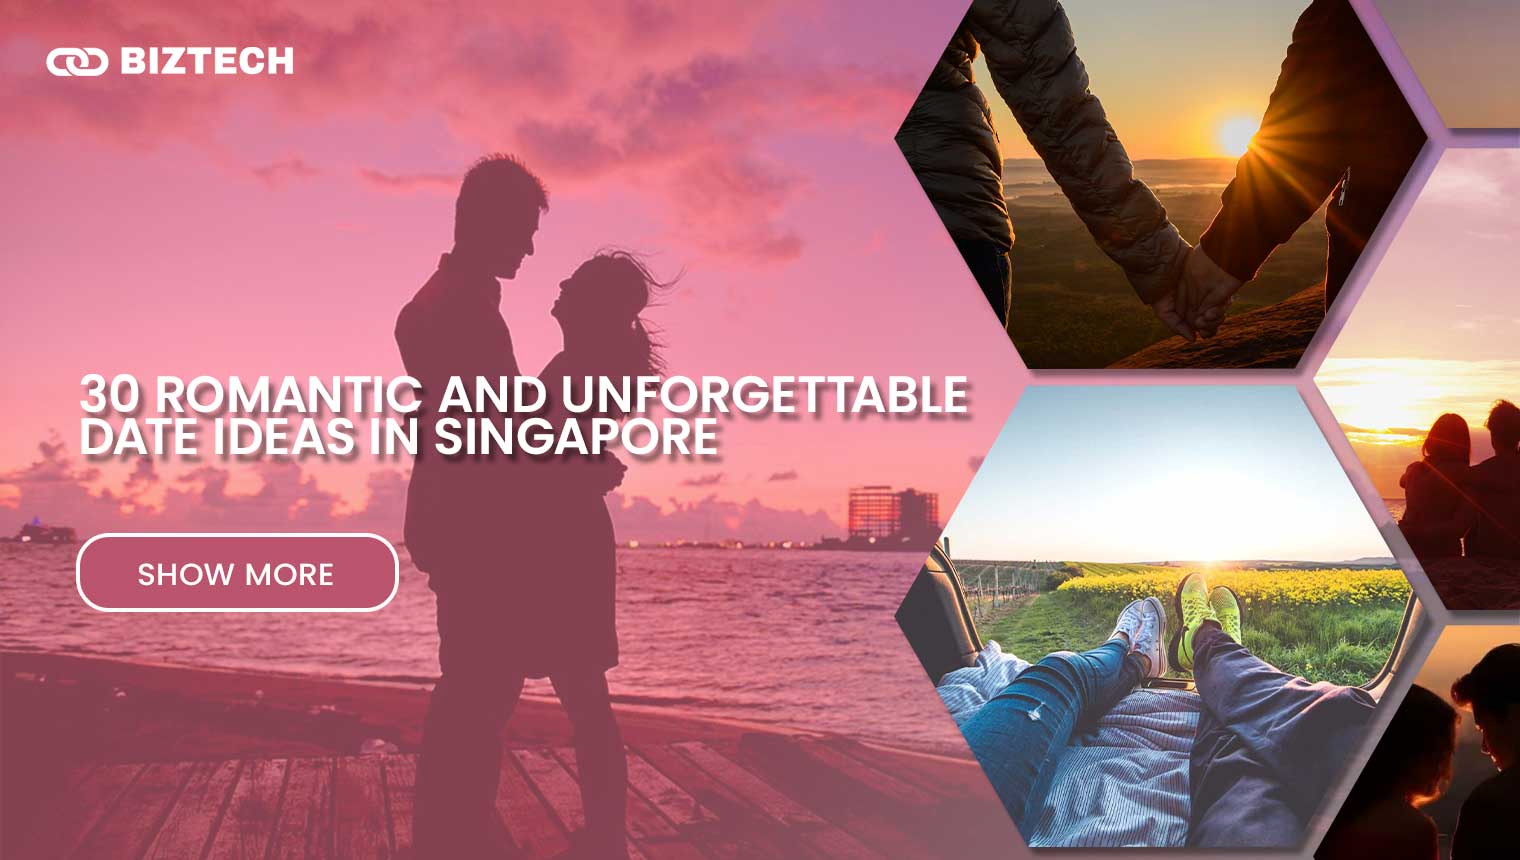 30 Romantic Date Ideas in Singapore to Create an Unforgettable Experience with Your Partner